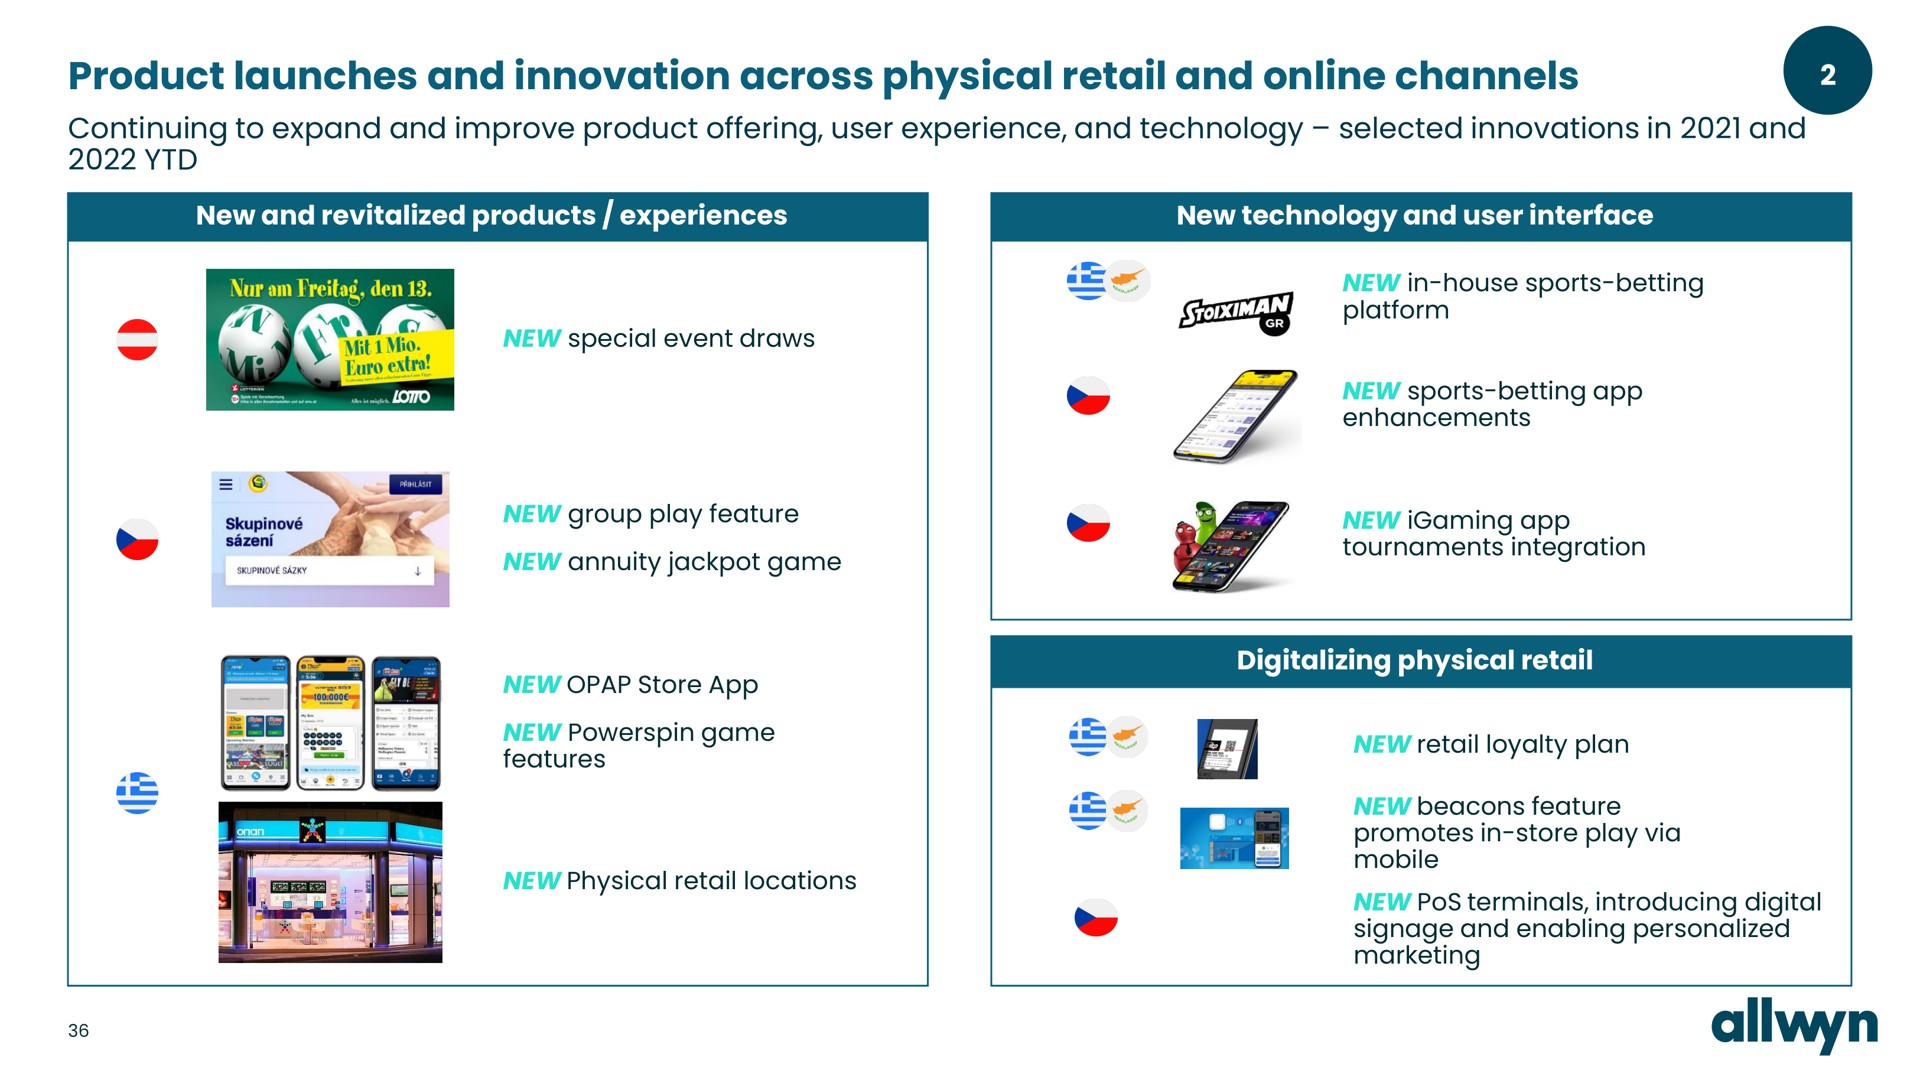 product launches and innovation across physical retail and channels | Allwyn